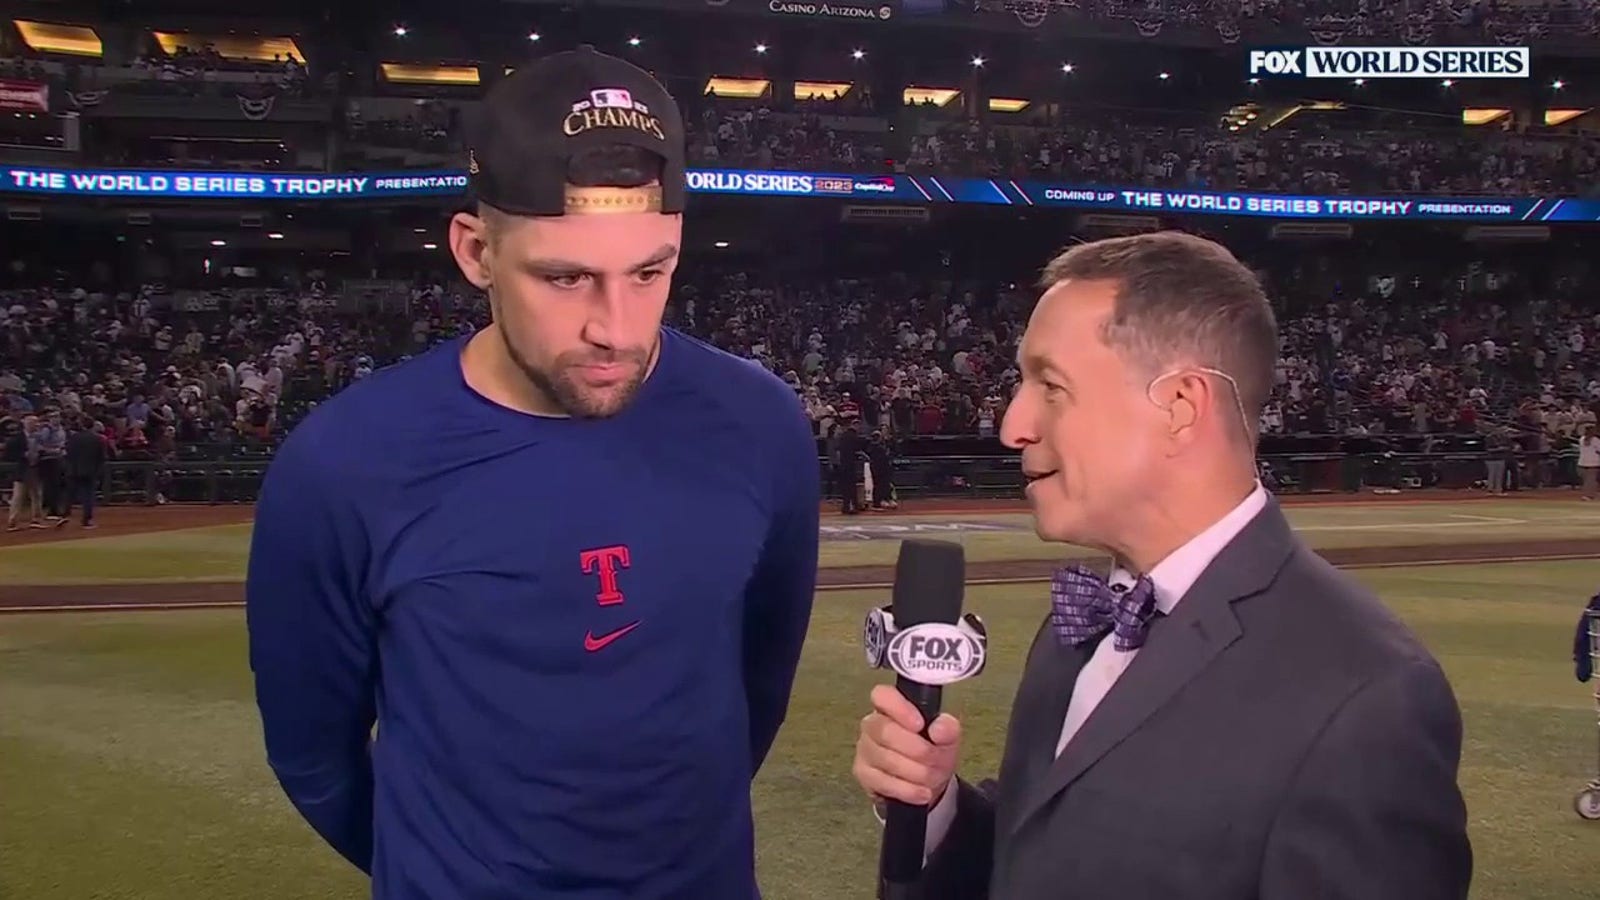 'I don't know how many rabbits I have in my hat left!' - Nathan Eovaldi talks emotions of clinching World Series